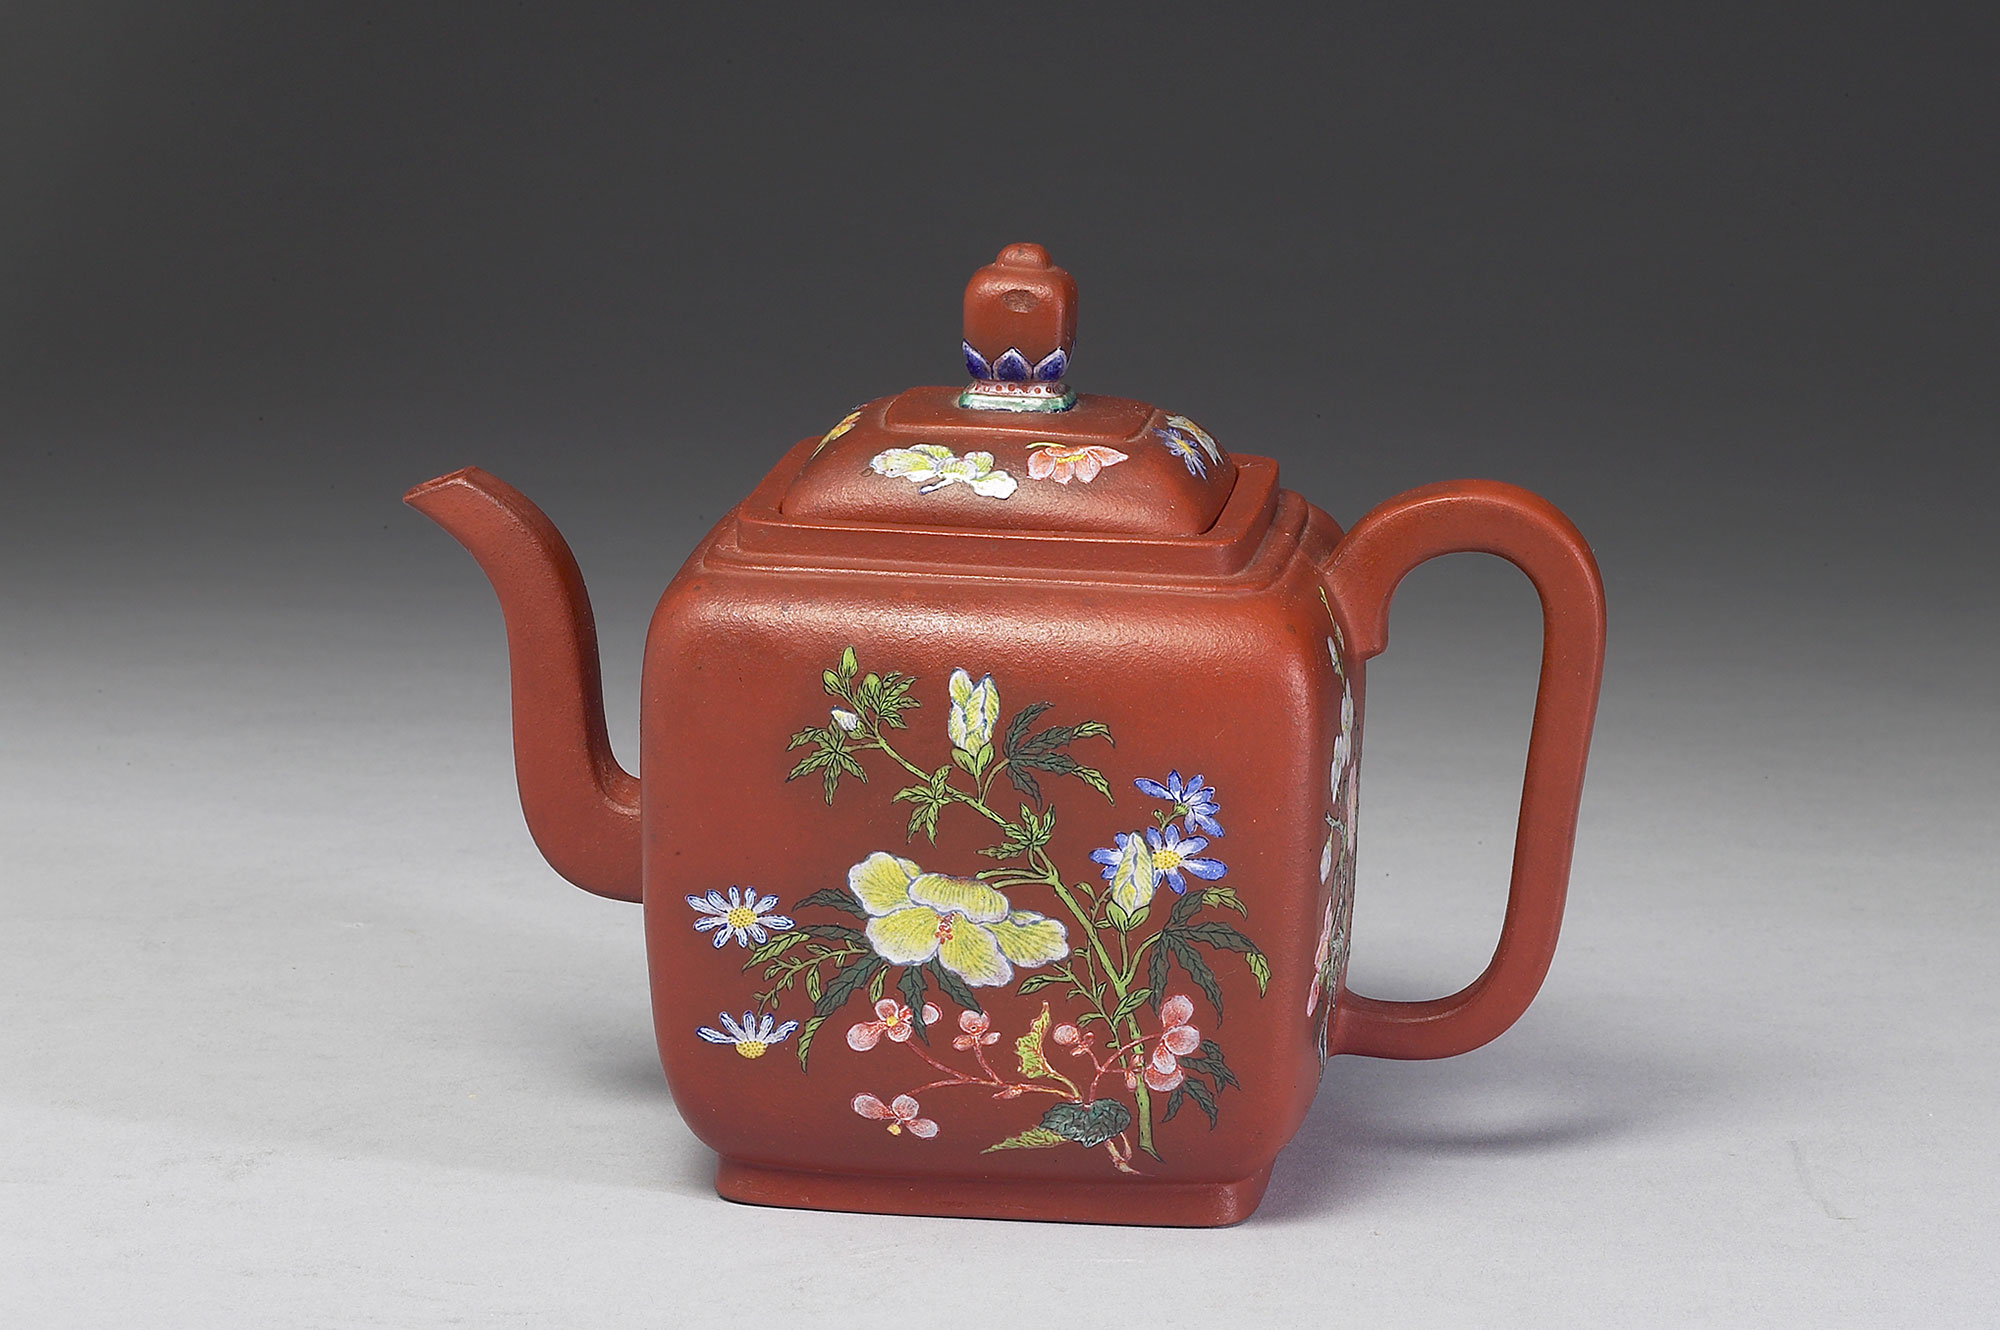 Yixing square teapot with flowers of the four seasons in painted enamels